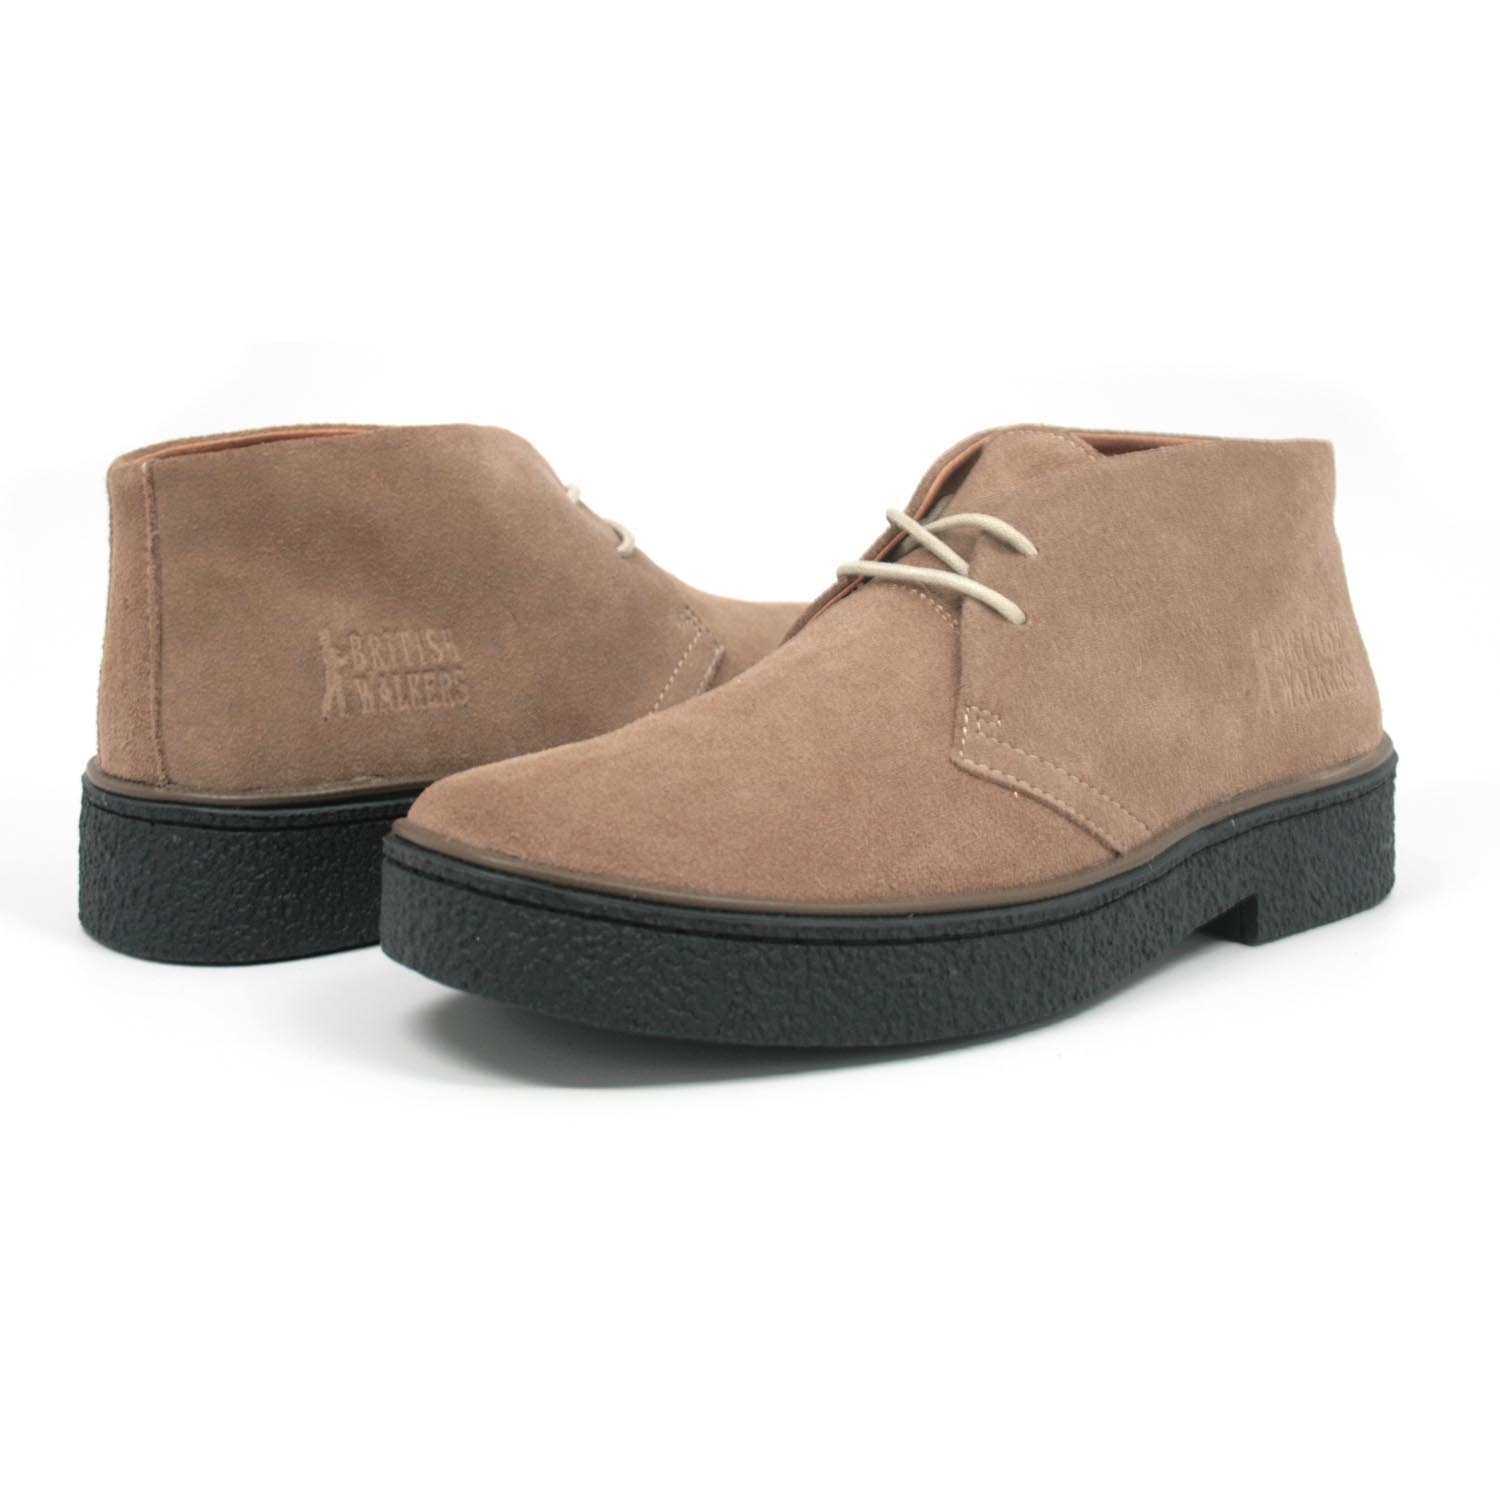 Playboy Chukka Boot Taupe Suede [1226 